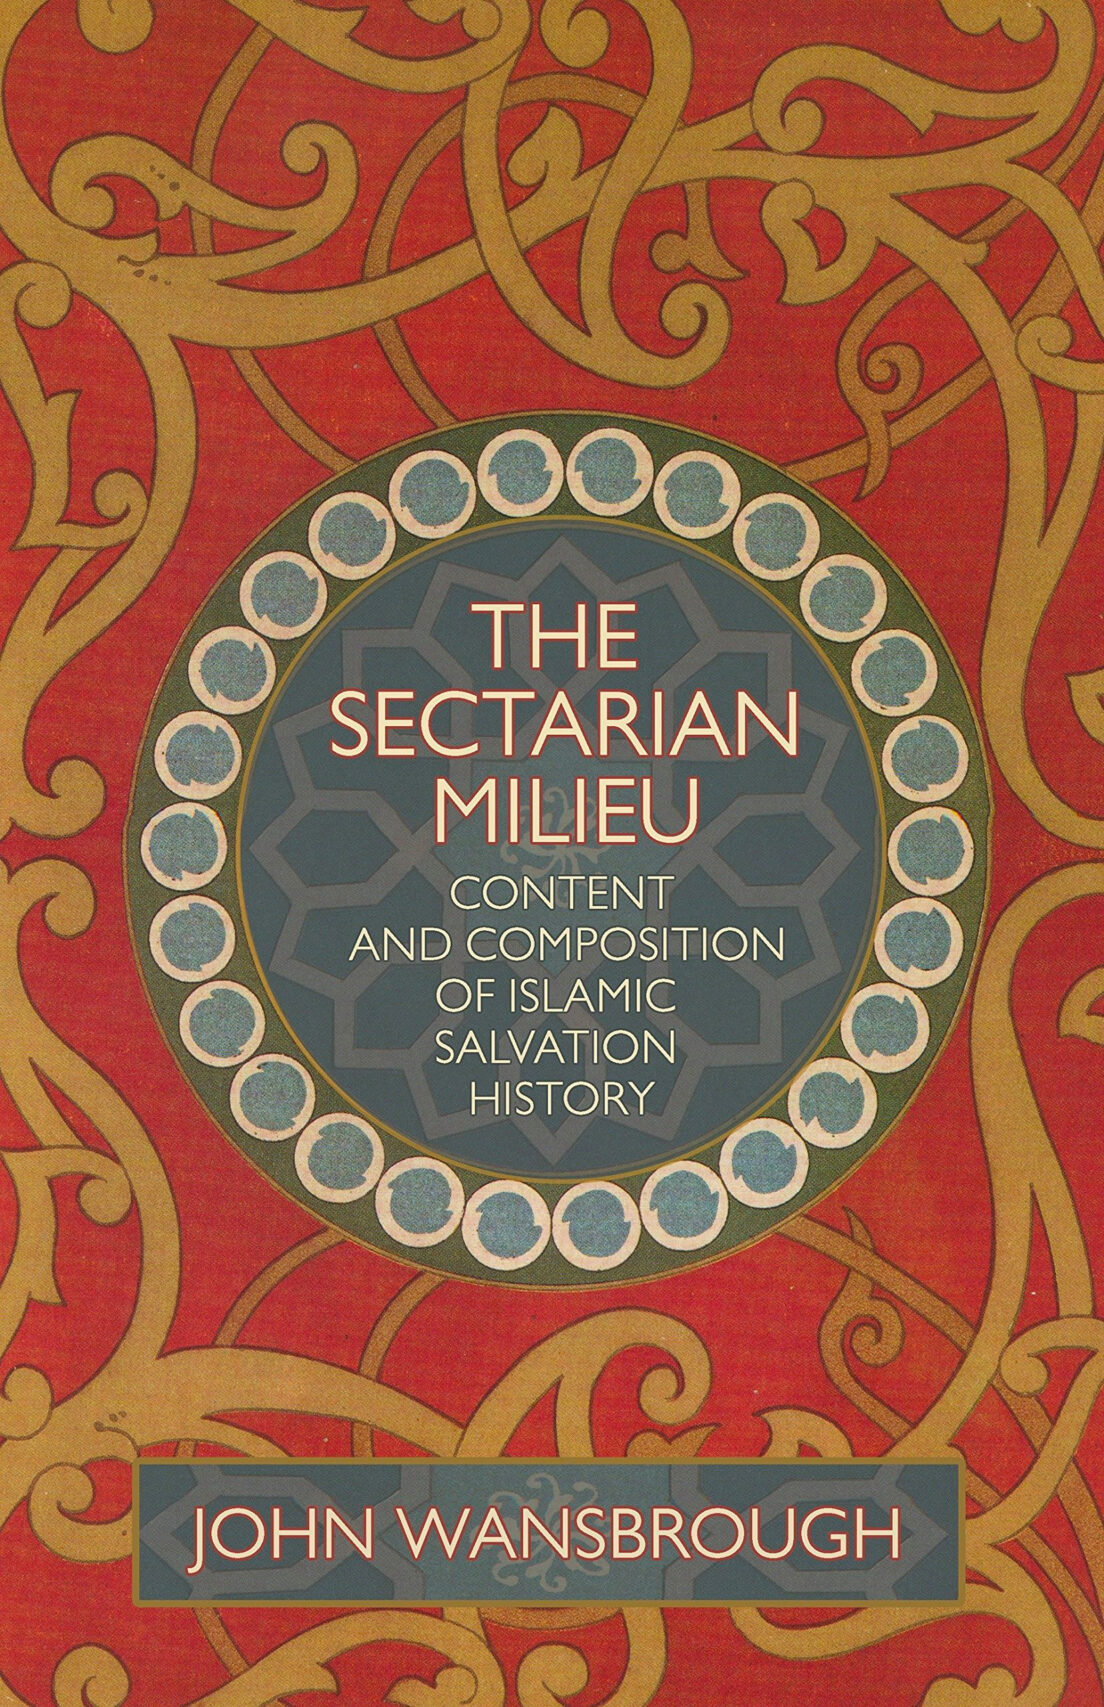 The Sectarian Milieu: Content And Composition of Islamic Salvation History by John Wansbrough